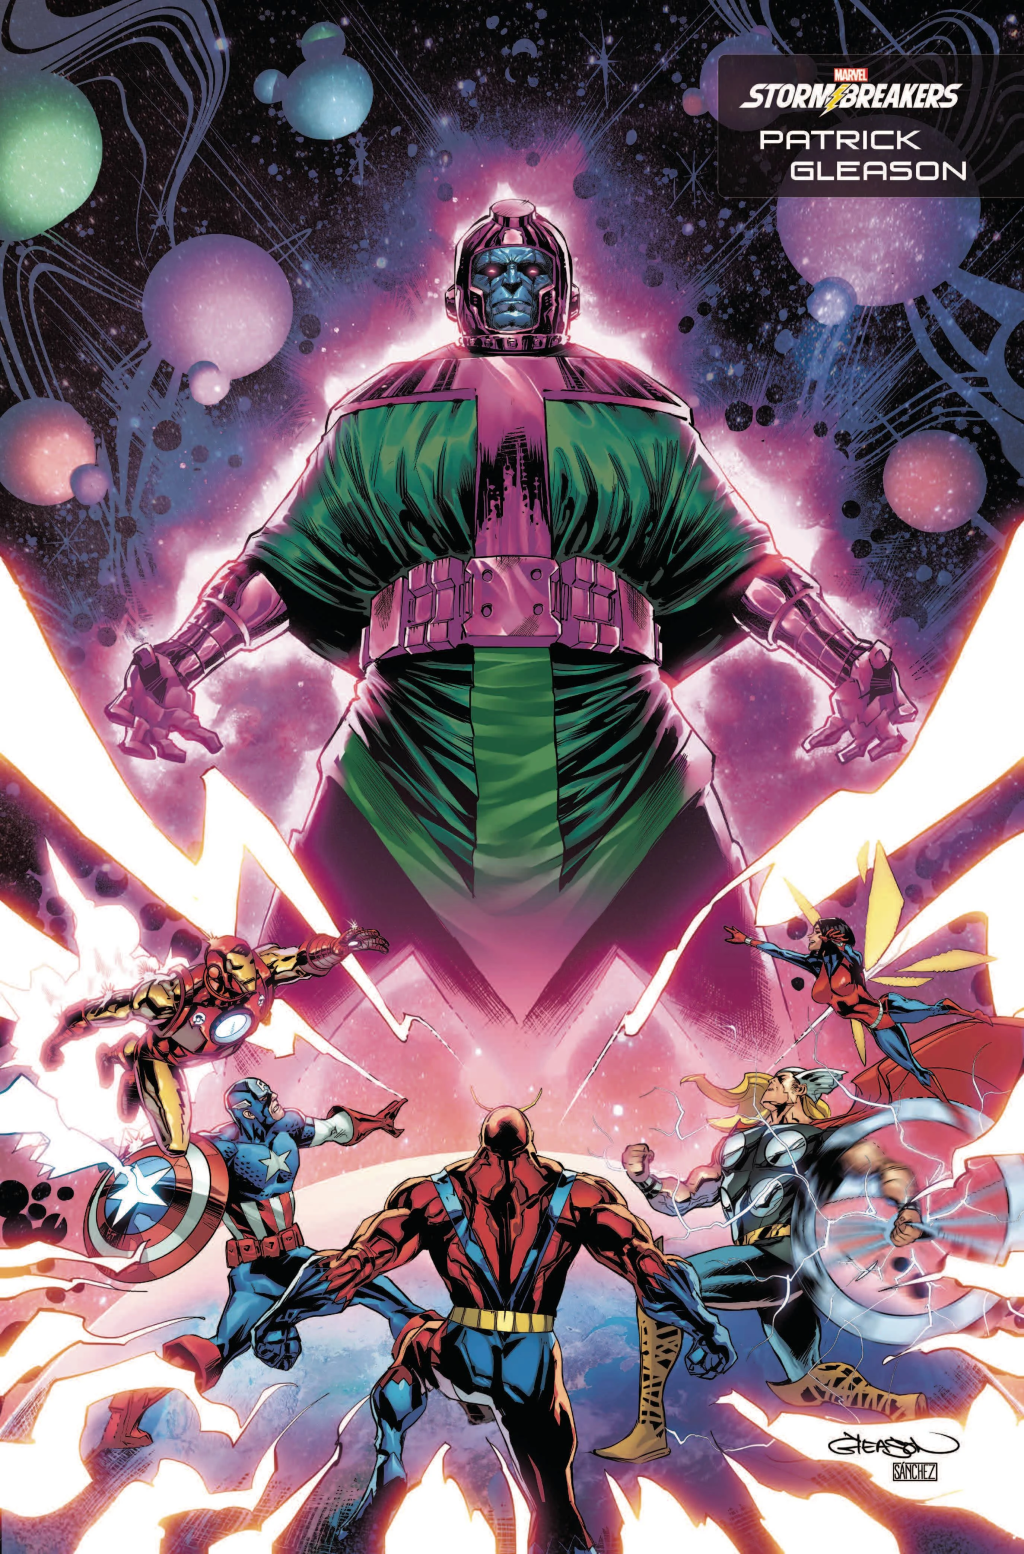 AVENGERS: THE KANG DYNASTY No Longer Being Directed By Destin